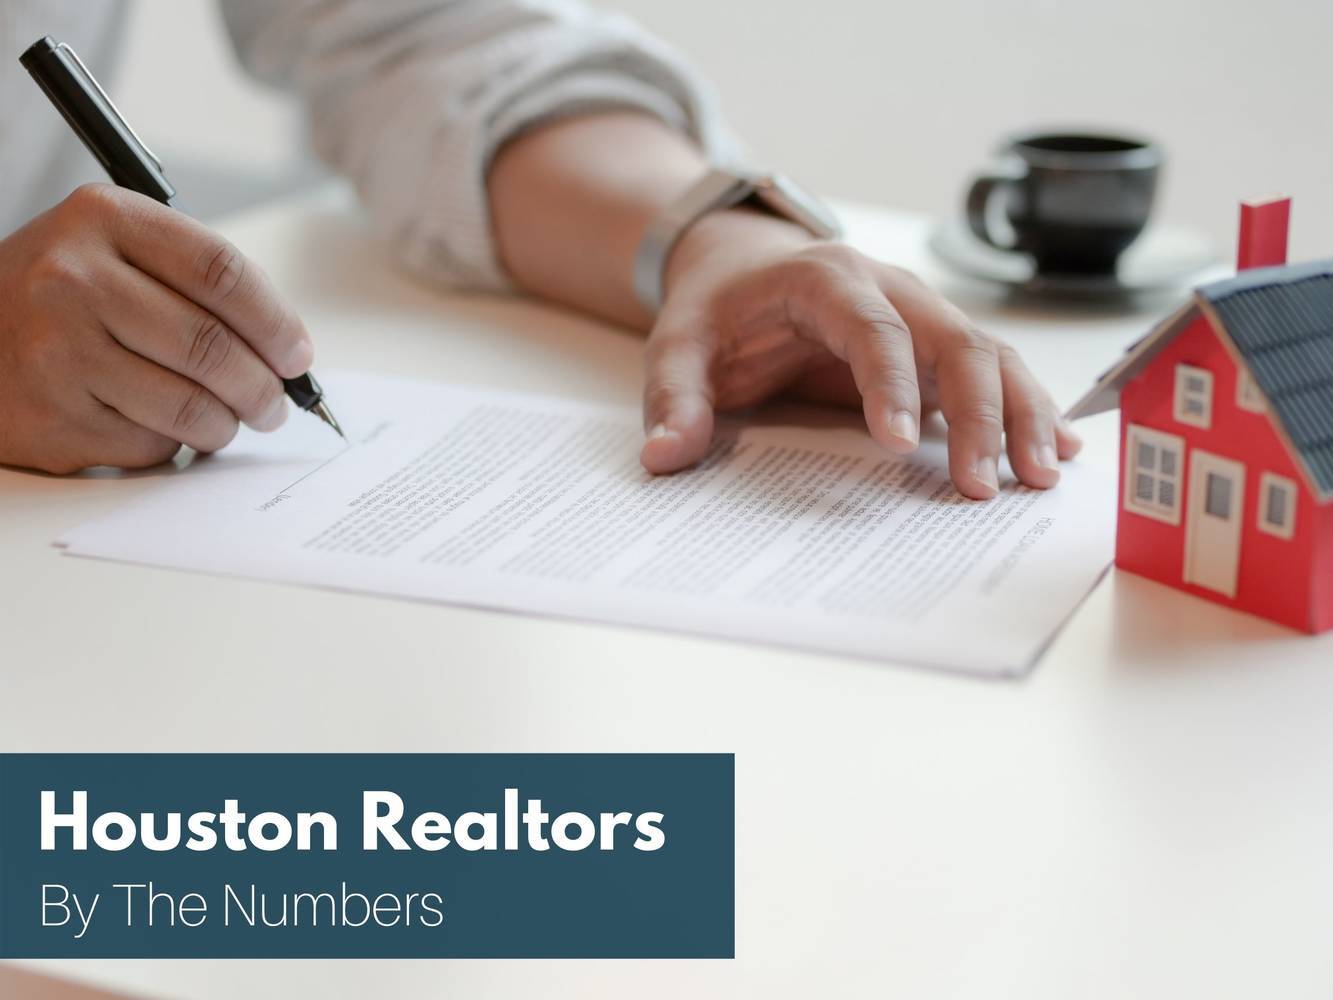 What The Numbers Say About Houston Realtors